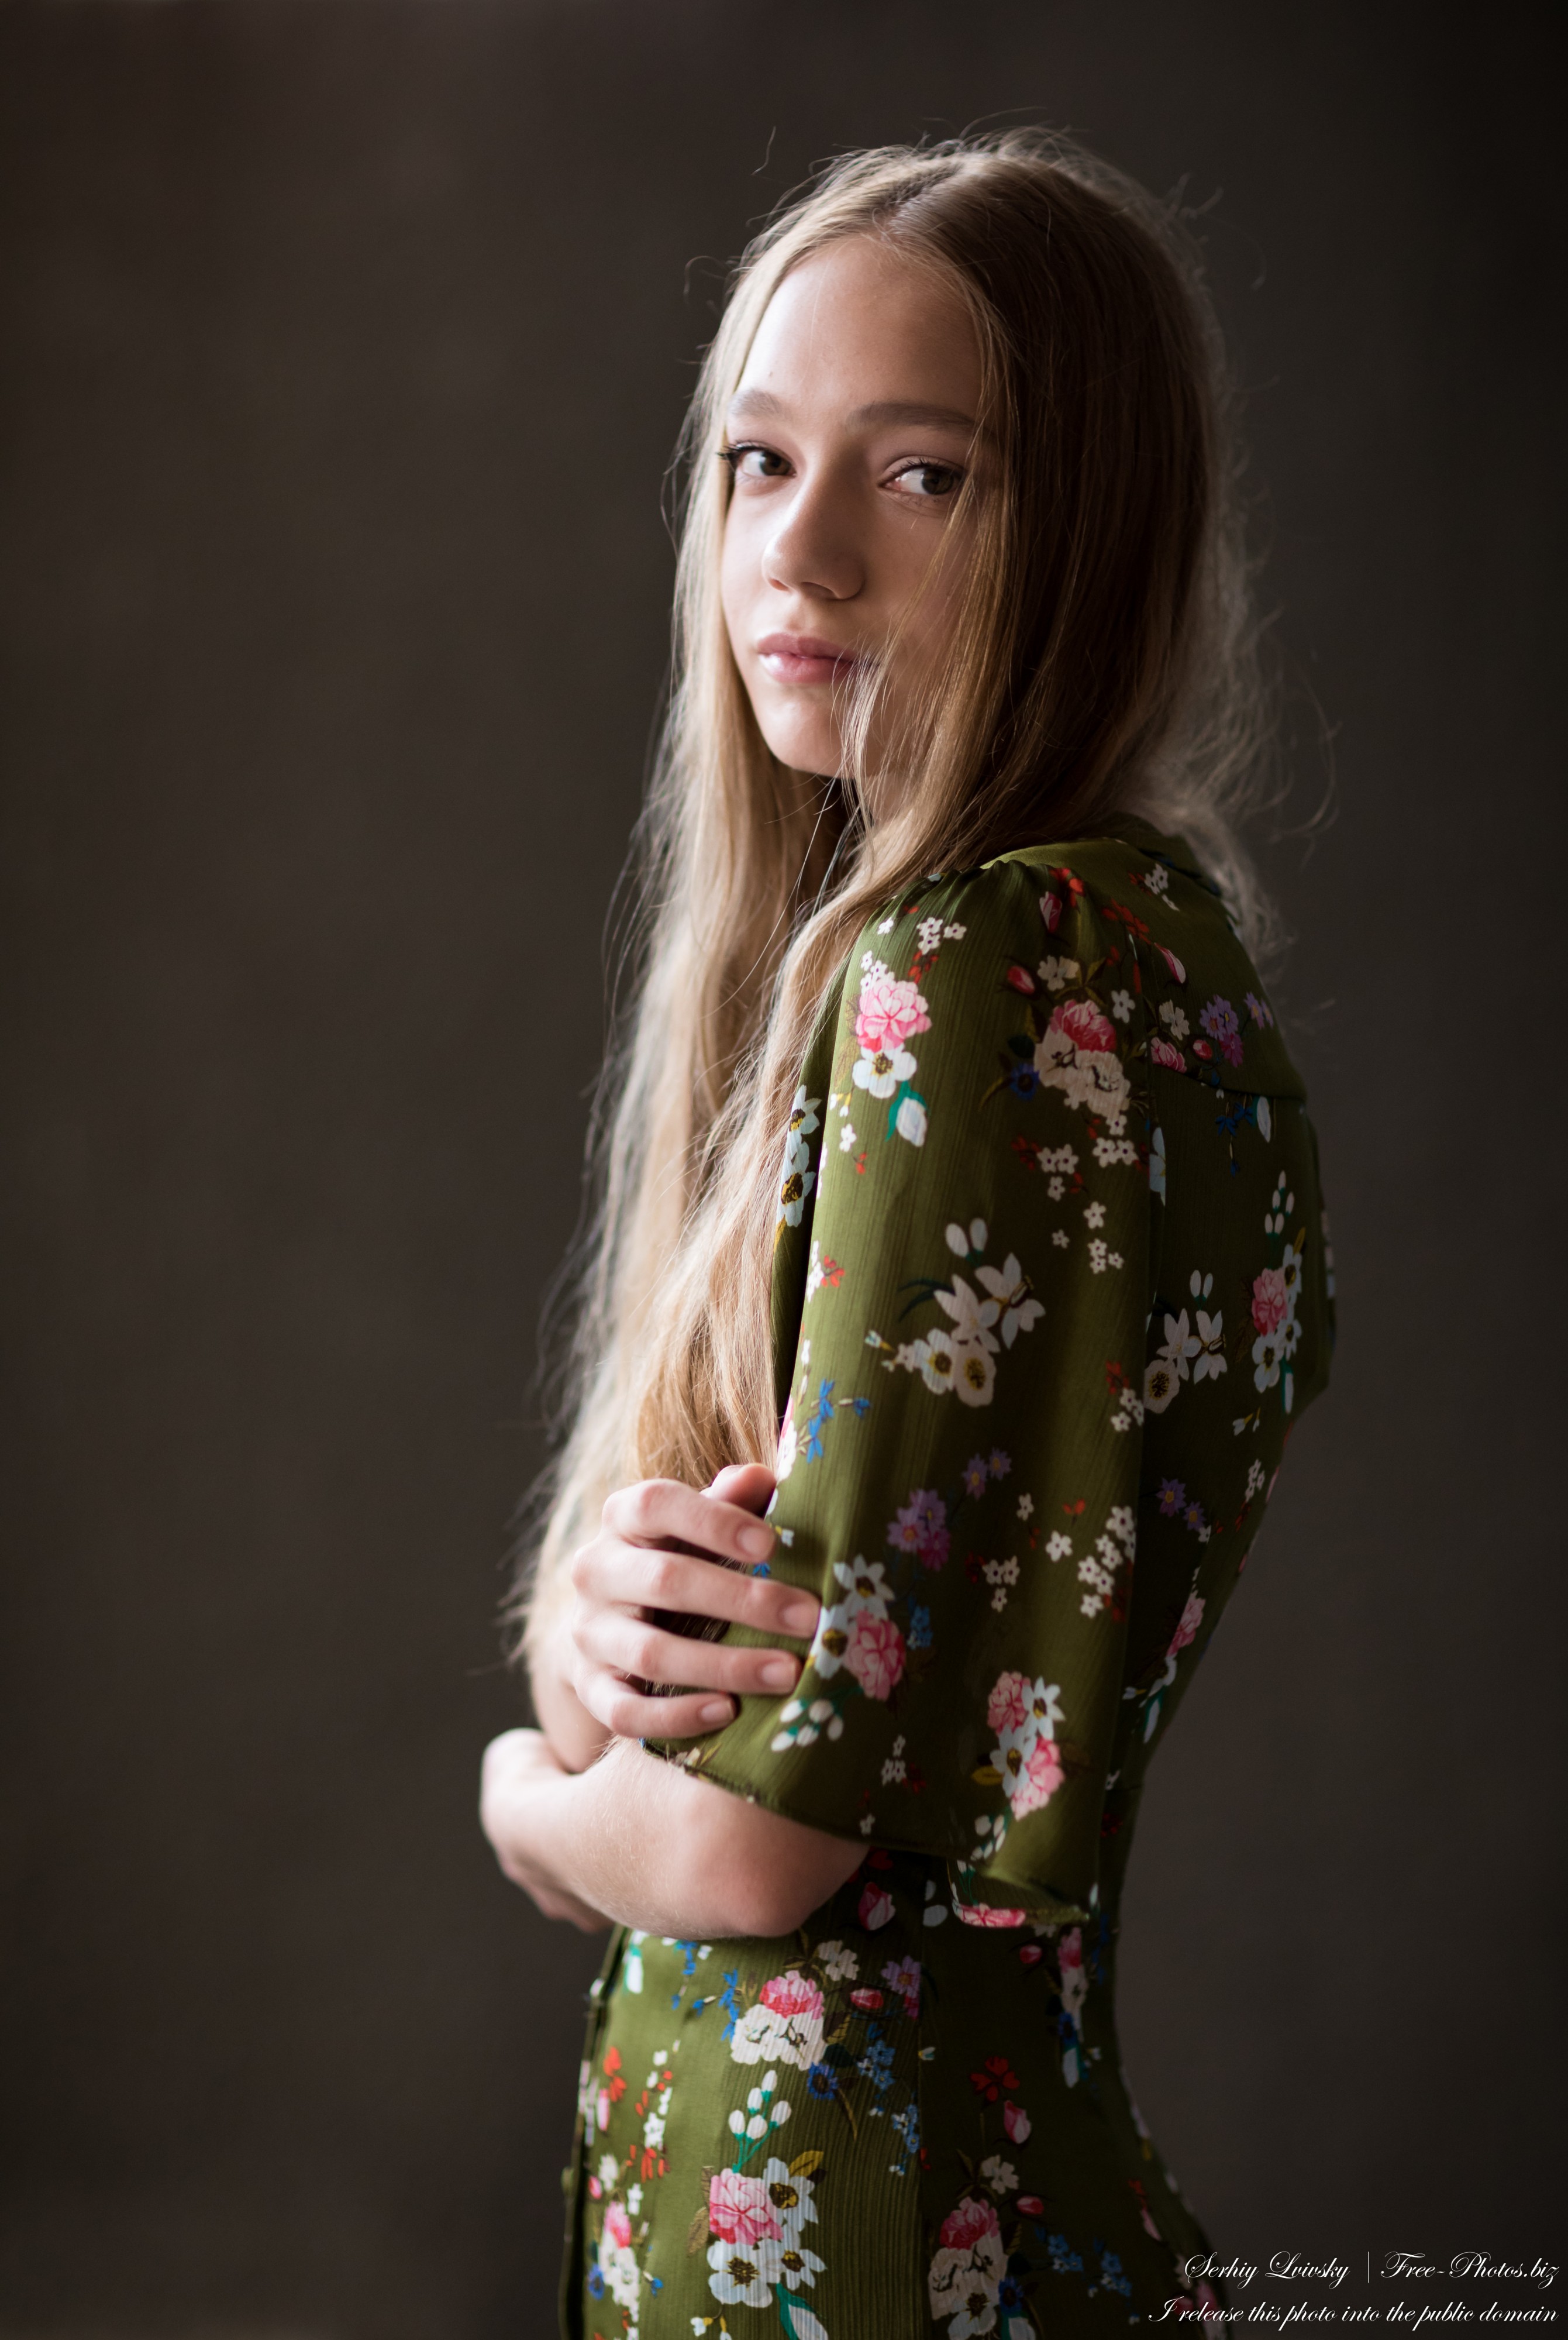 Photo Of Marta A 16 Year Old Natural Blonde Girl Photographed By Serhiy Lvivsky In July 2020